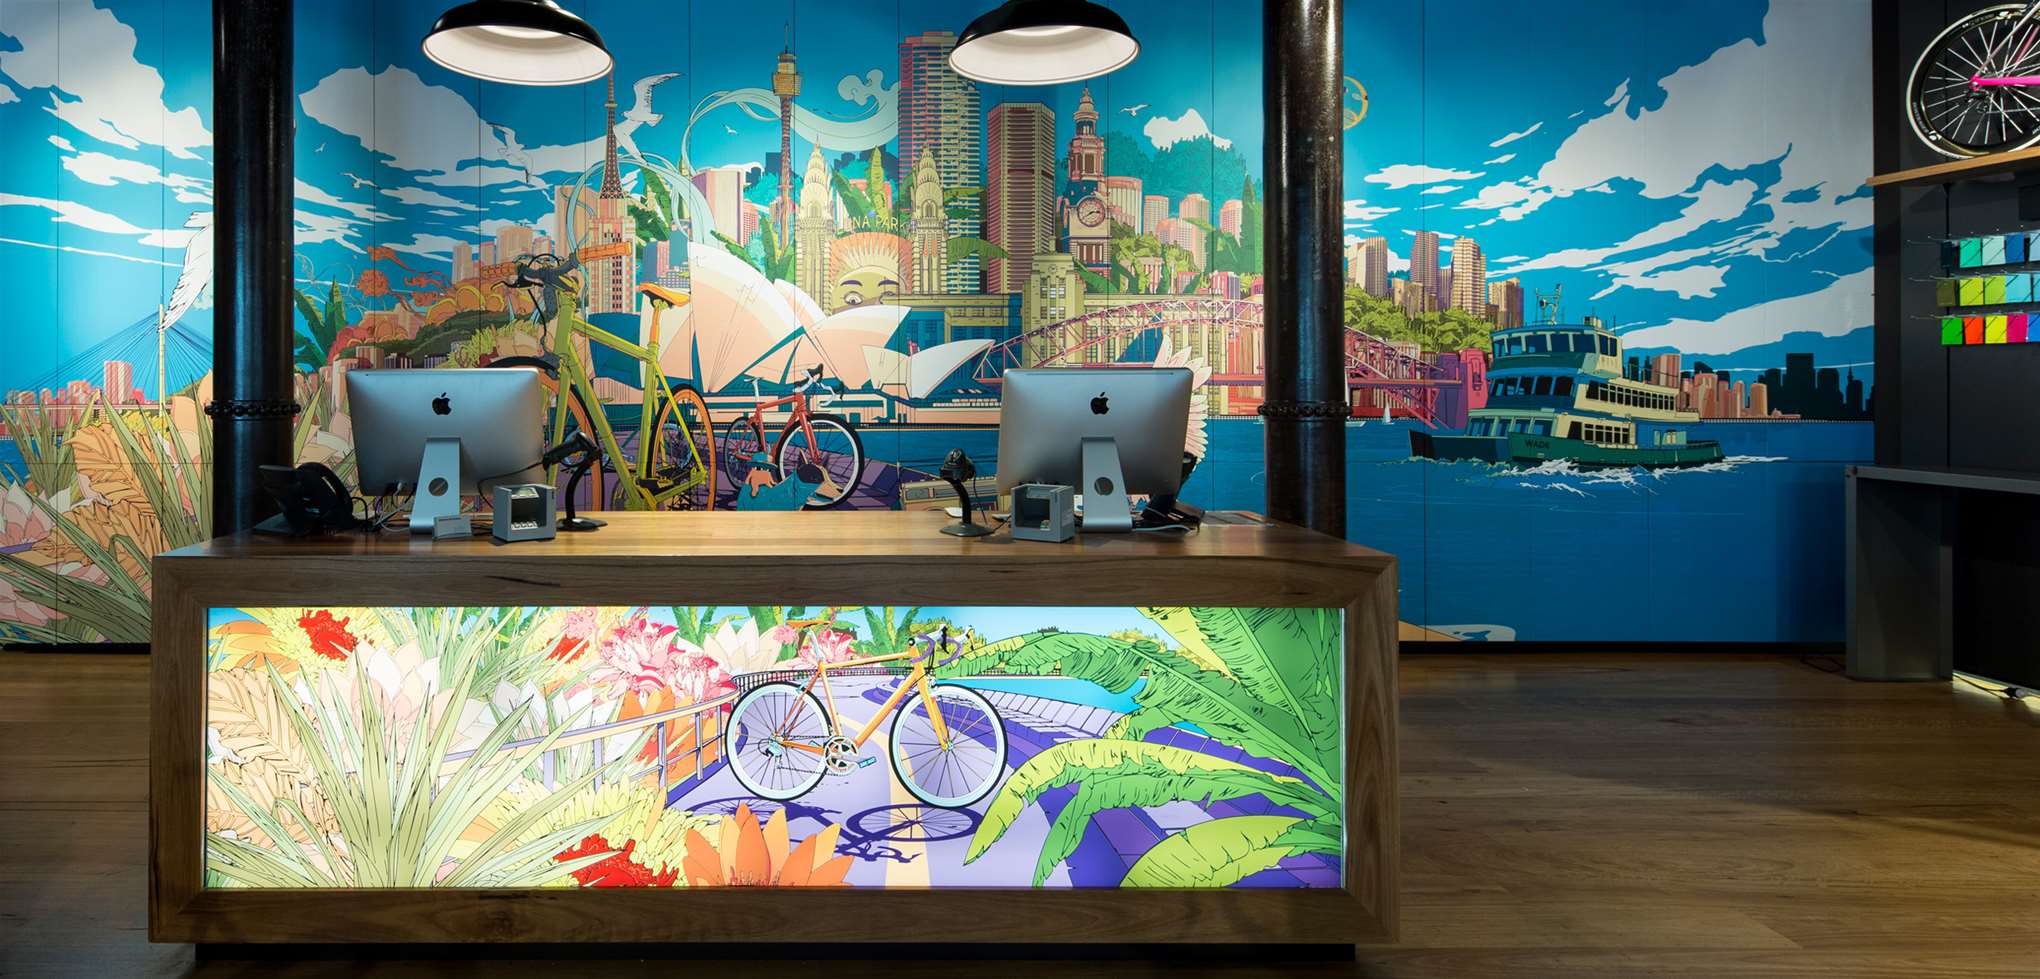 Shan Jiang, Sydney cityscape scene illustrations as large-scale wall mural graphics within a retail reception space.  